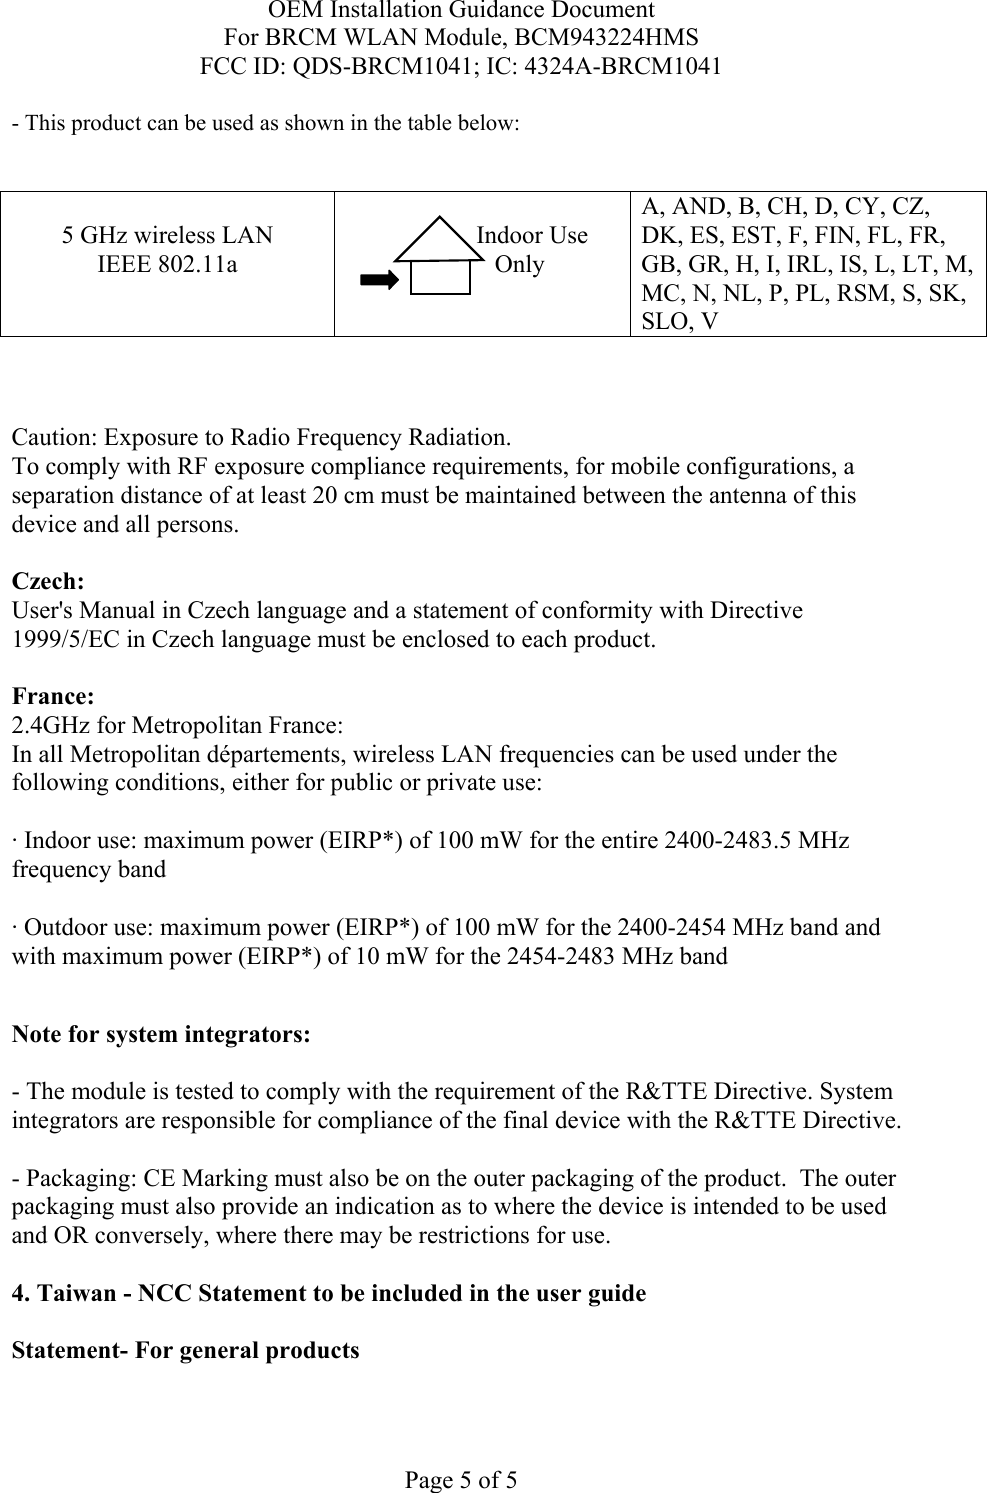 OEM Installation Guidance Document For BRCM WLAN Module, BCM943224HMS FCC ID: QDS-BRCM1041; IC: 4324A-BRCM1041  Page 5 of 5 - This product can be used as shown in the table below:   5 GHz wireless LAN IEEE 802.11a                  Indoor Use             Only  A, AND, B, CH, D, CY, CZ, DK, ES, EST, F, FIN, FL, FR, GB, GR, H, I, IRL, IS, L, LT, M, MC, N, NL, P, PL, RSM, S, SK, SLO, V    Caution: Exposure to Radio Frequency Radiation.   To comply with RF exposure compliance requirements, for mobile configurations, a separation distance of at least 20 cm must be maintained between the antenna of this device and all persons.  Czech:  User&apos;s Manual in Czech language and a statement of conformity with Directive 1999/5/EC in Czech language must be enclosed to each product.   France: 2.4GHz for Metropolitan France:   In all Metropolitan départements, wireless LAN frequencies can be used under the following conditions, either for public or private use:  · Indoor use: maximum power (EIRP*) of 100 mW for the entire 2400-2483.5 MHz frequency band · Outdoor use: maximum power (EIRP*) of 100 mW for the 2400-2454 MHz band and with maximum power (EIRP*) of 10 mW for the 2454-2483 MHz band  Note for system integrators:   - The module is tested to comply with the requirement of the R&amp;TTE Directive. System integrators are responsible for compliance of the final device with the R&amp;TTE Directive.   - Packaging: CE Marking must also be on the outer packaging of the product.  The outer packaging must also provide an indication as to where the device is intended to be used and OR conversely, where there may be restrictions for use.   4. Taiwan - NCC Statement to be included in the user guide  Statement- For general products  